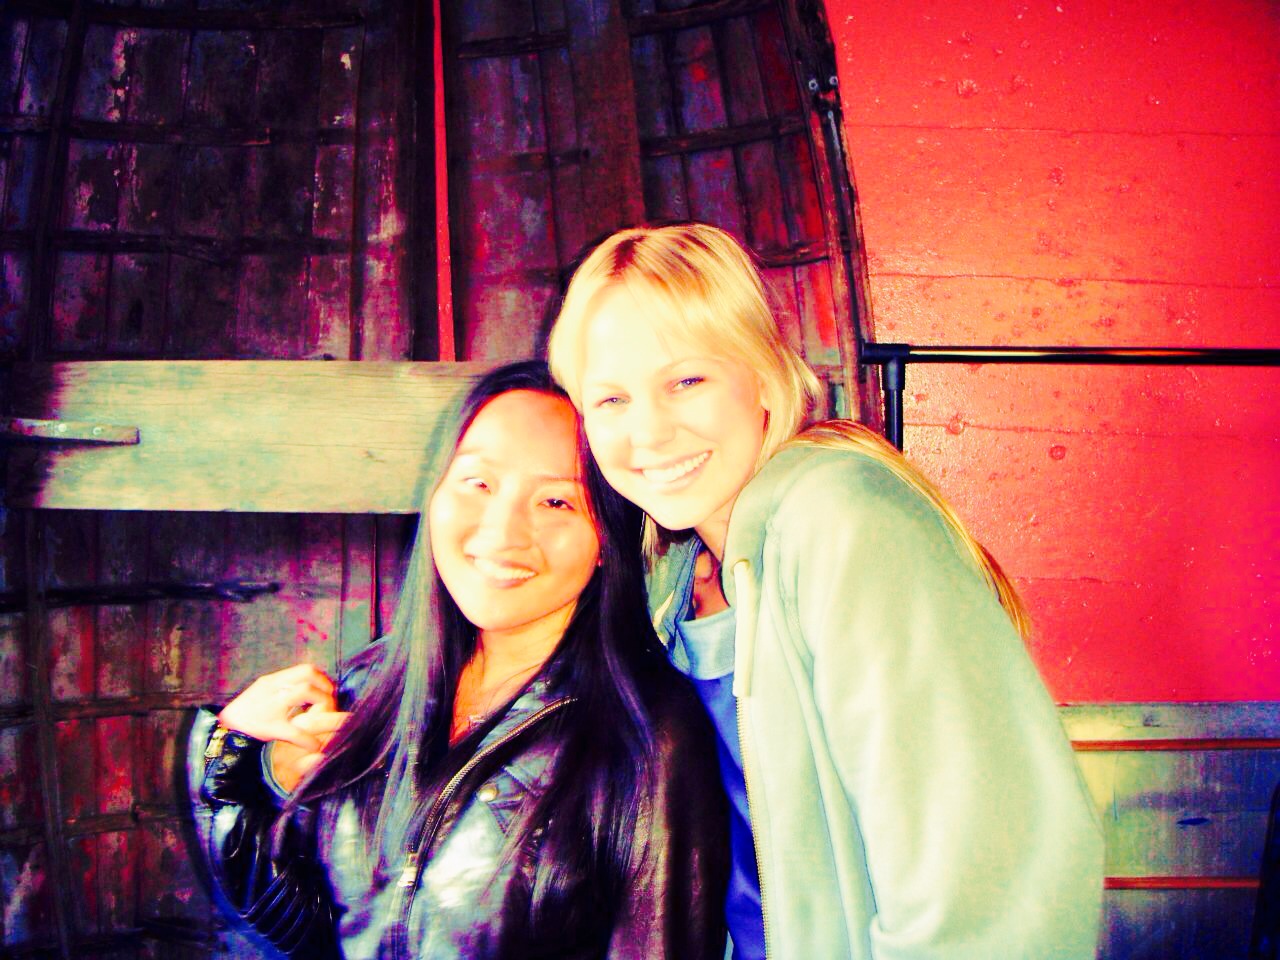 Vampire set with Adelaide Clemens